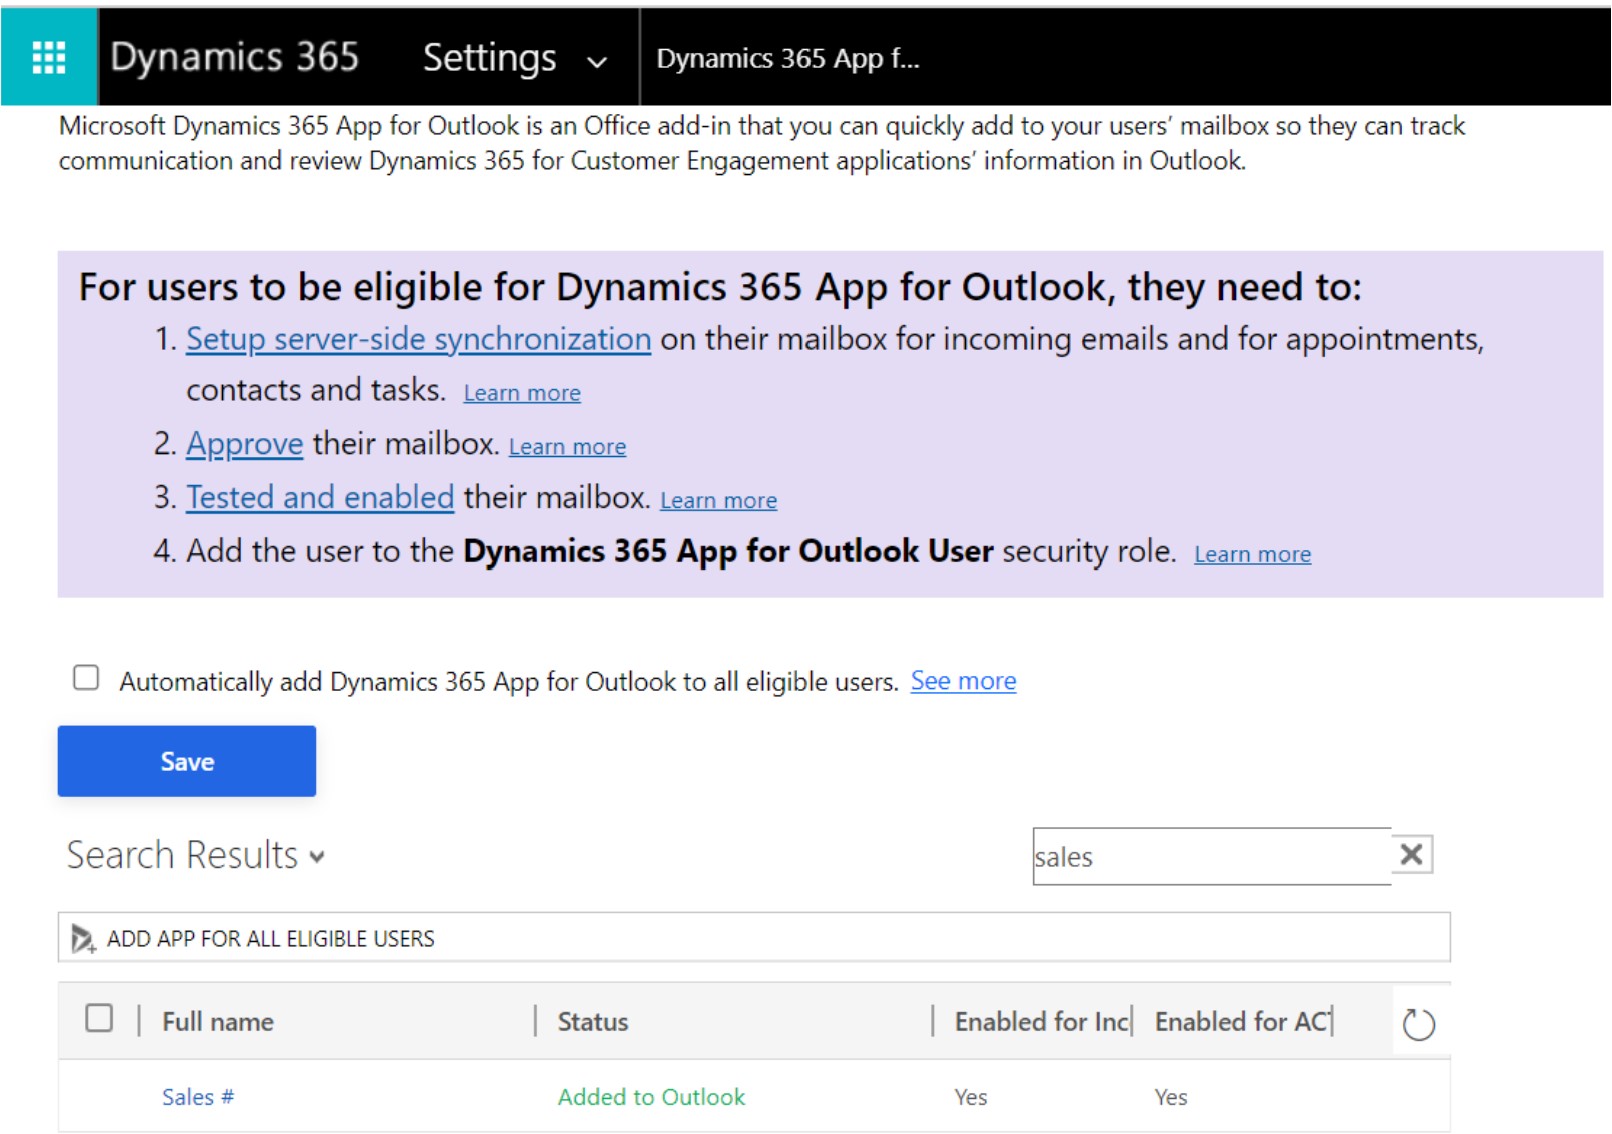 Screenshot showing that Dynamics 365 App has been successfully added to Outlook.